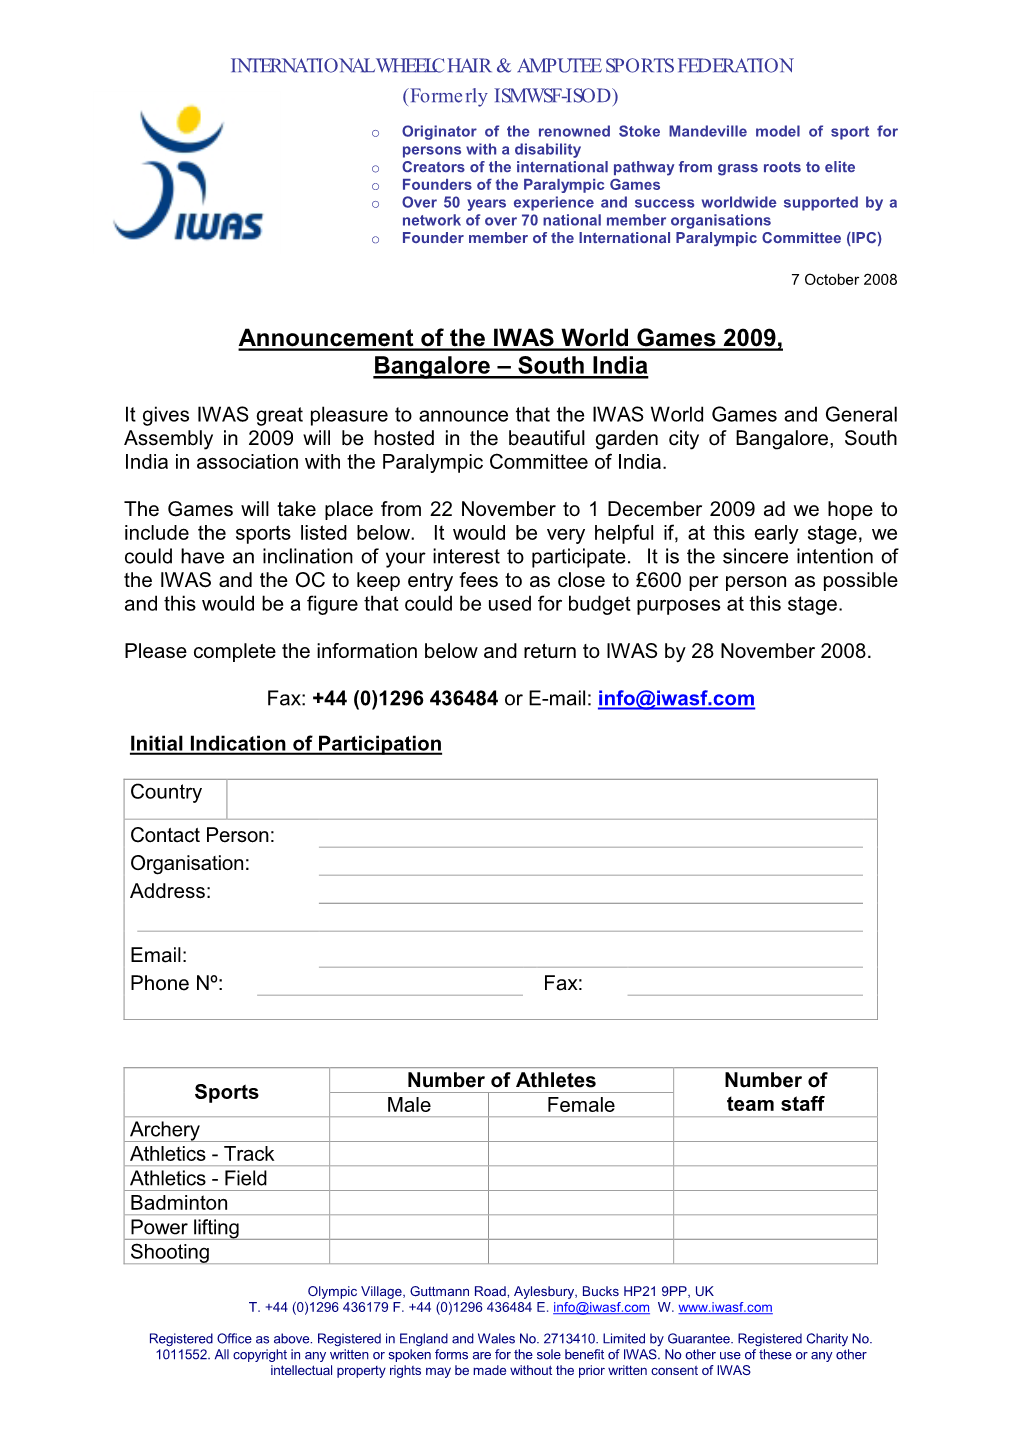 Announcement of the IWAS World Games 2009, Bangalore – South India